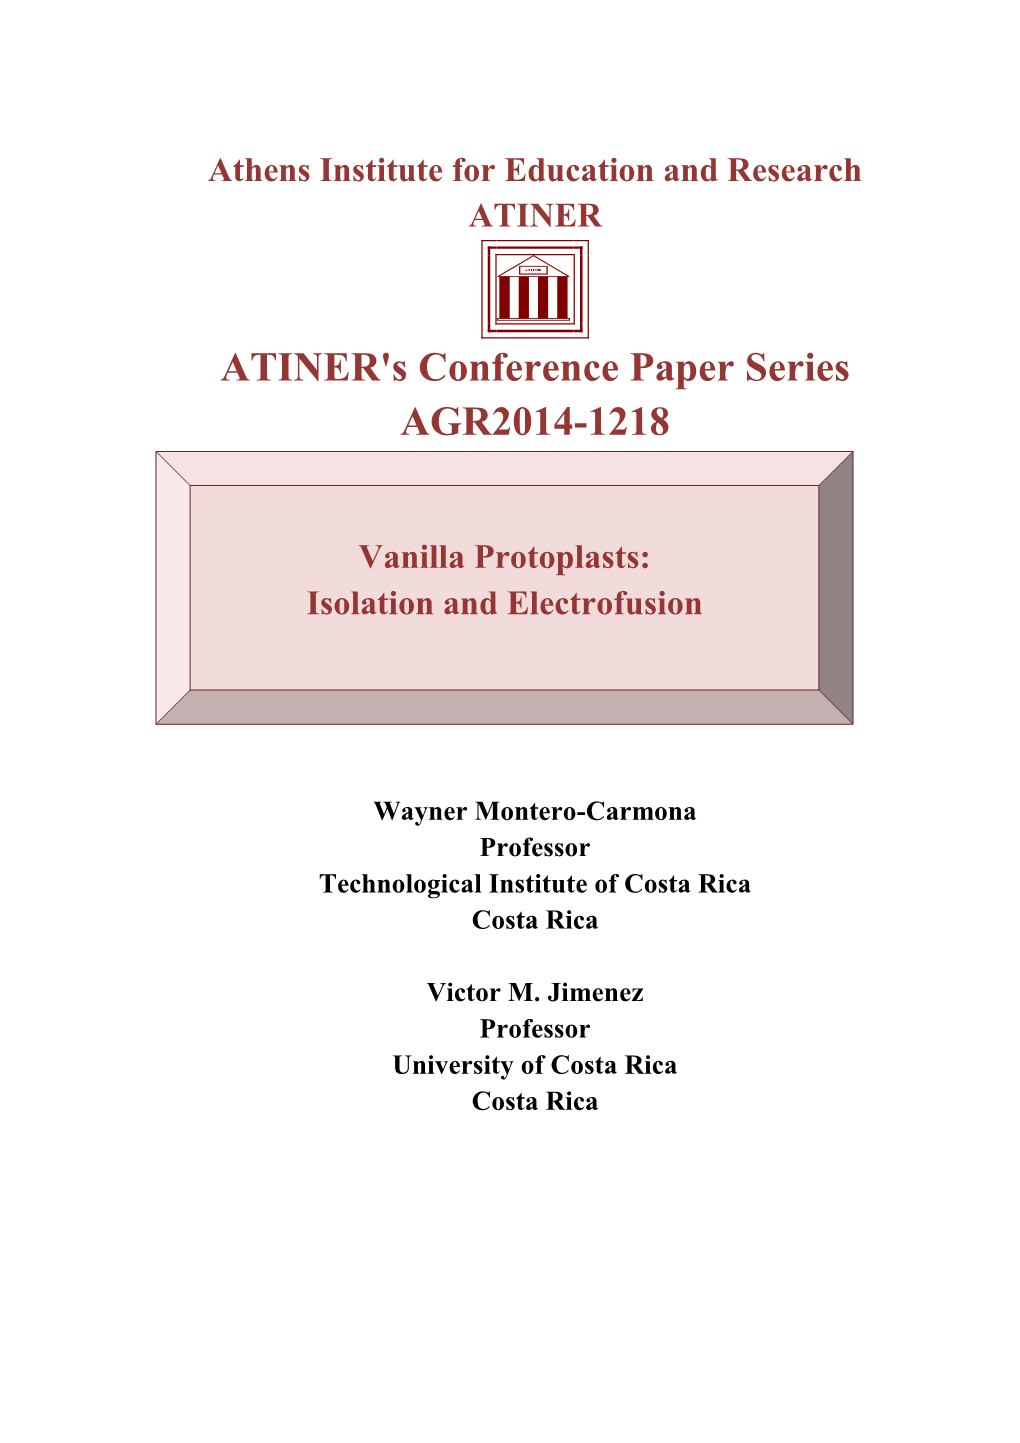 ATINER's Conference Paper Series AGR2014-1218